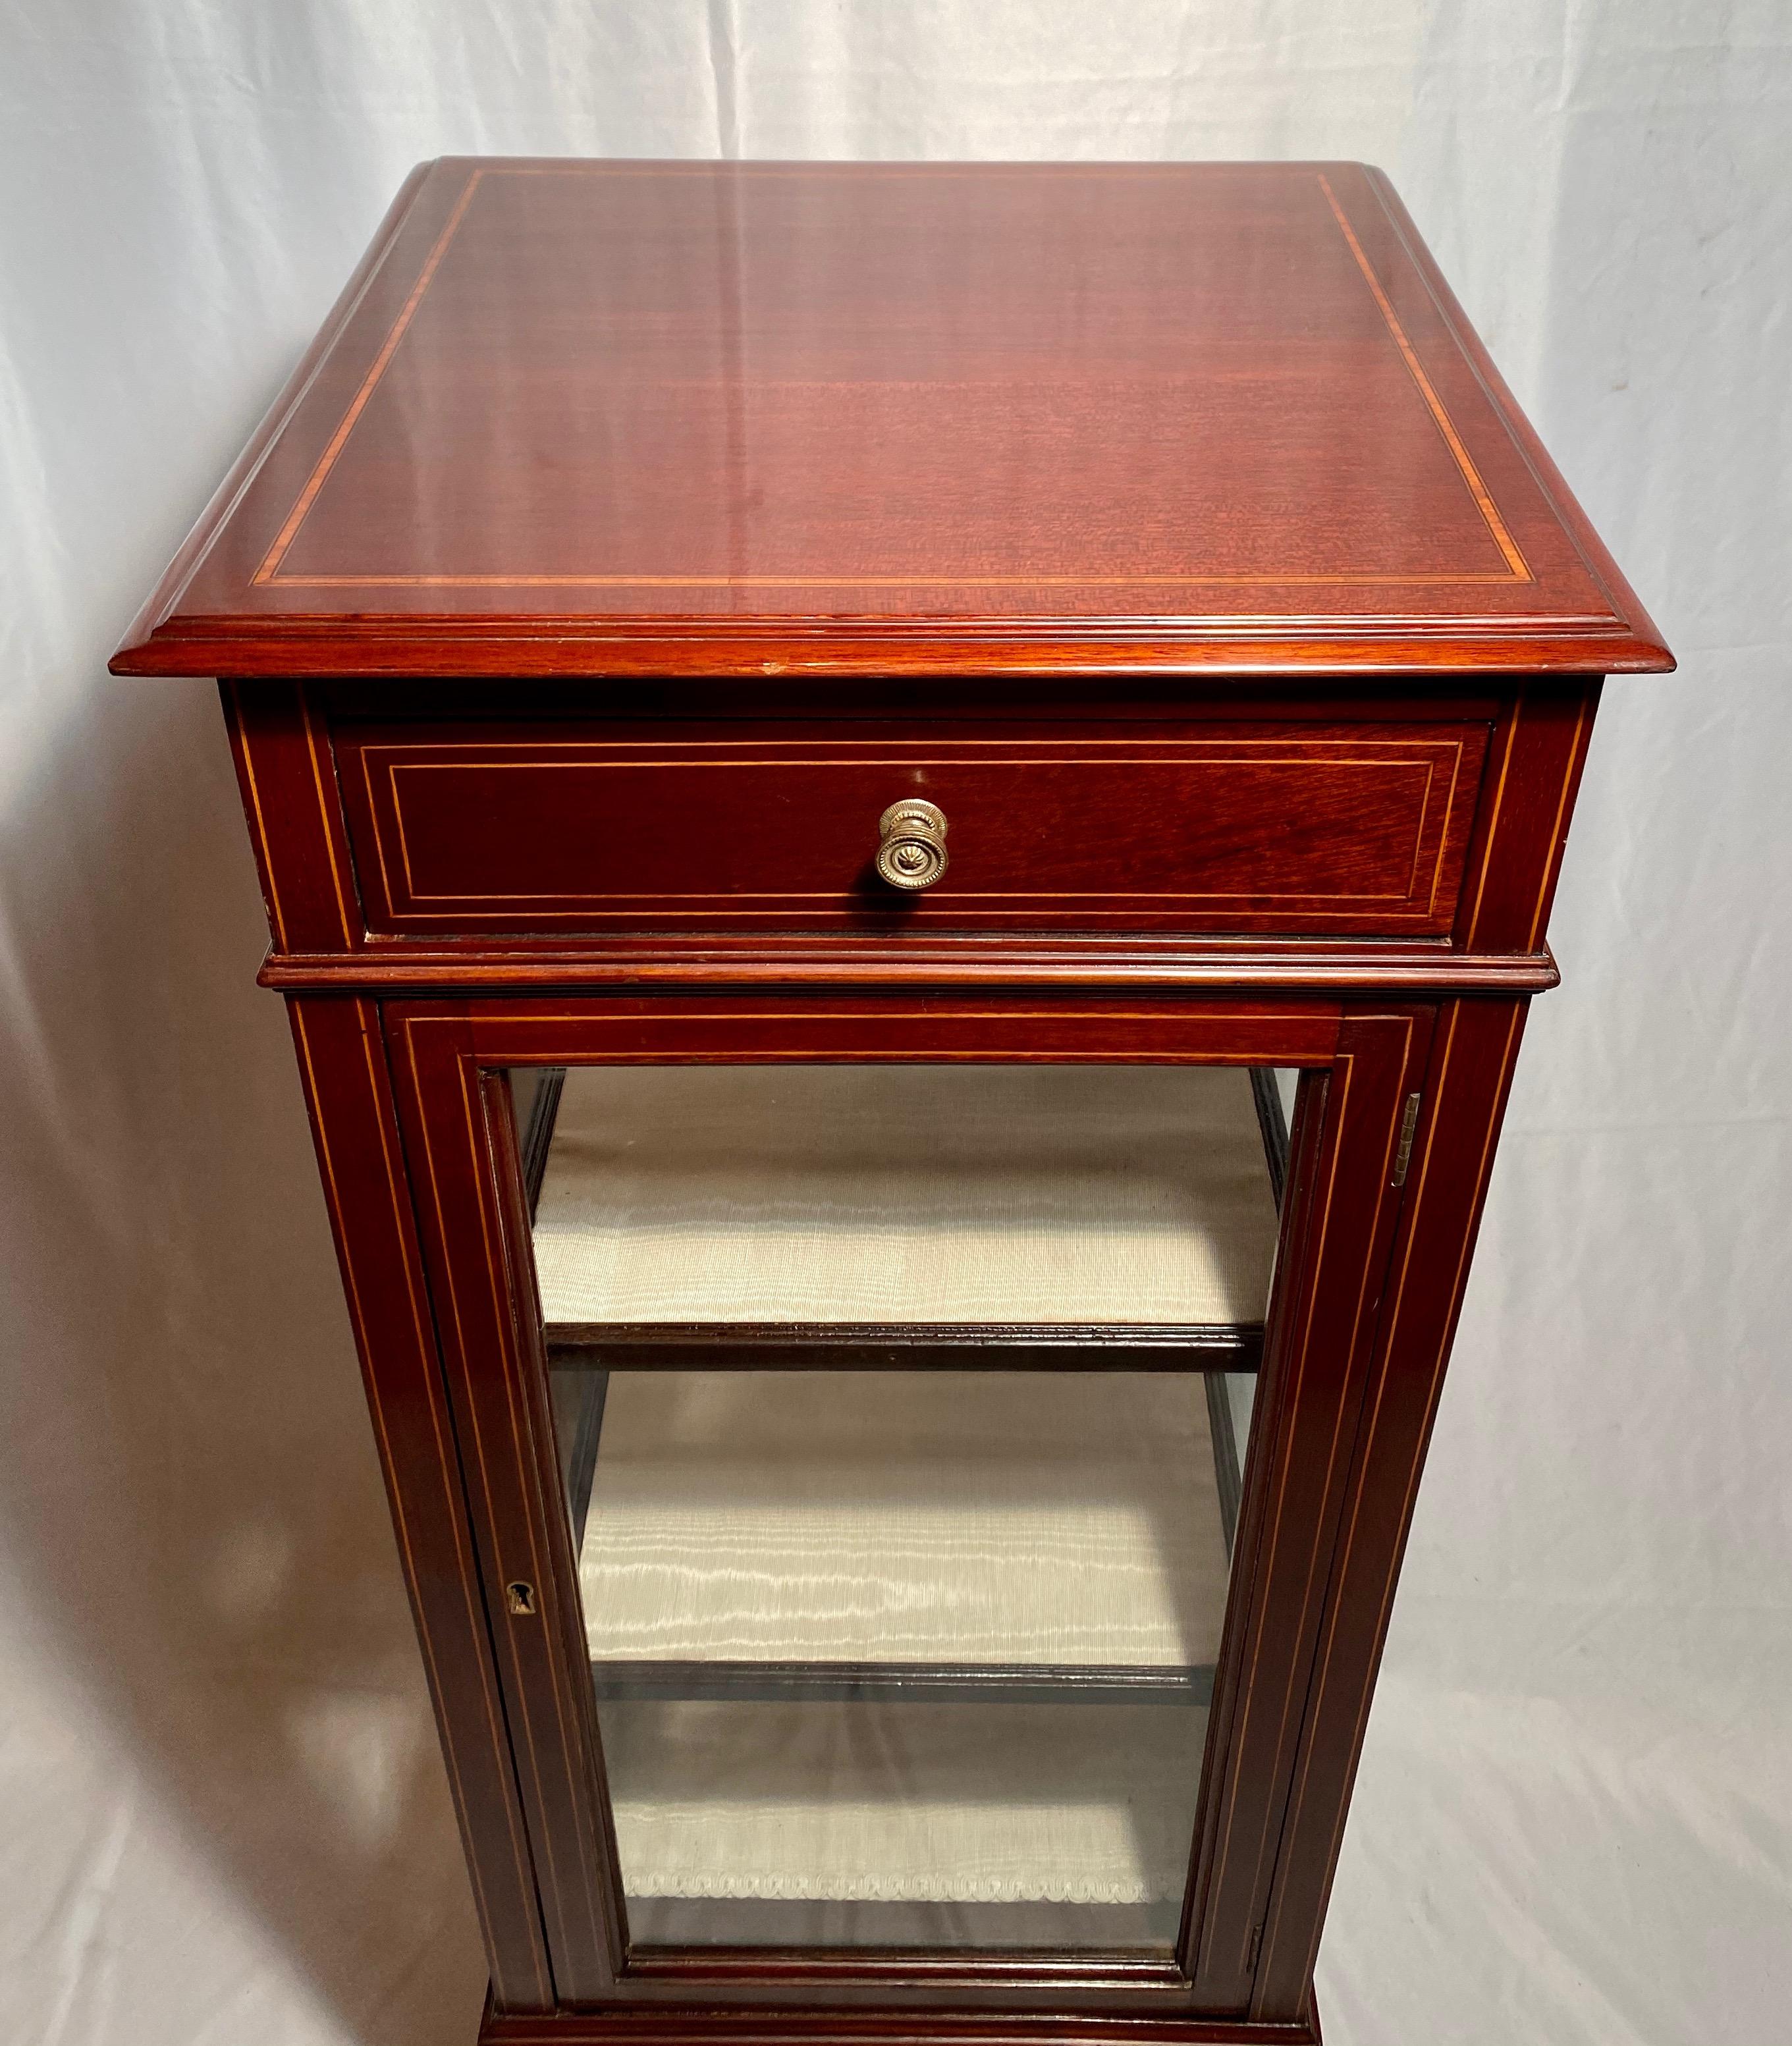 Antique English Mahogany Pedestal Vitrine In Good Condition For Sale In New Orleans, LA